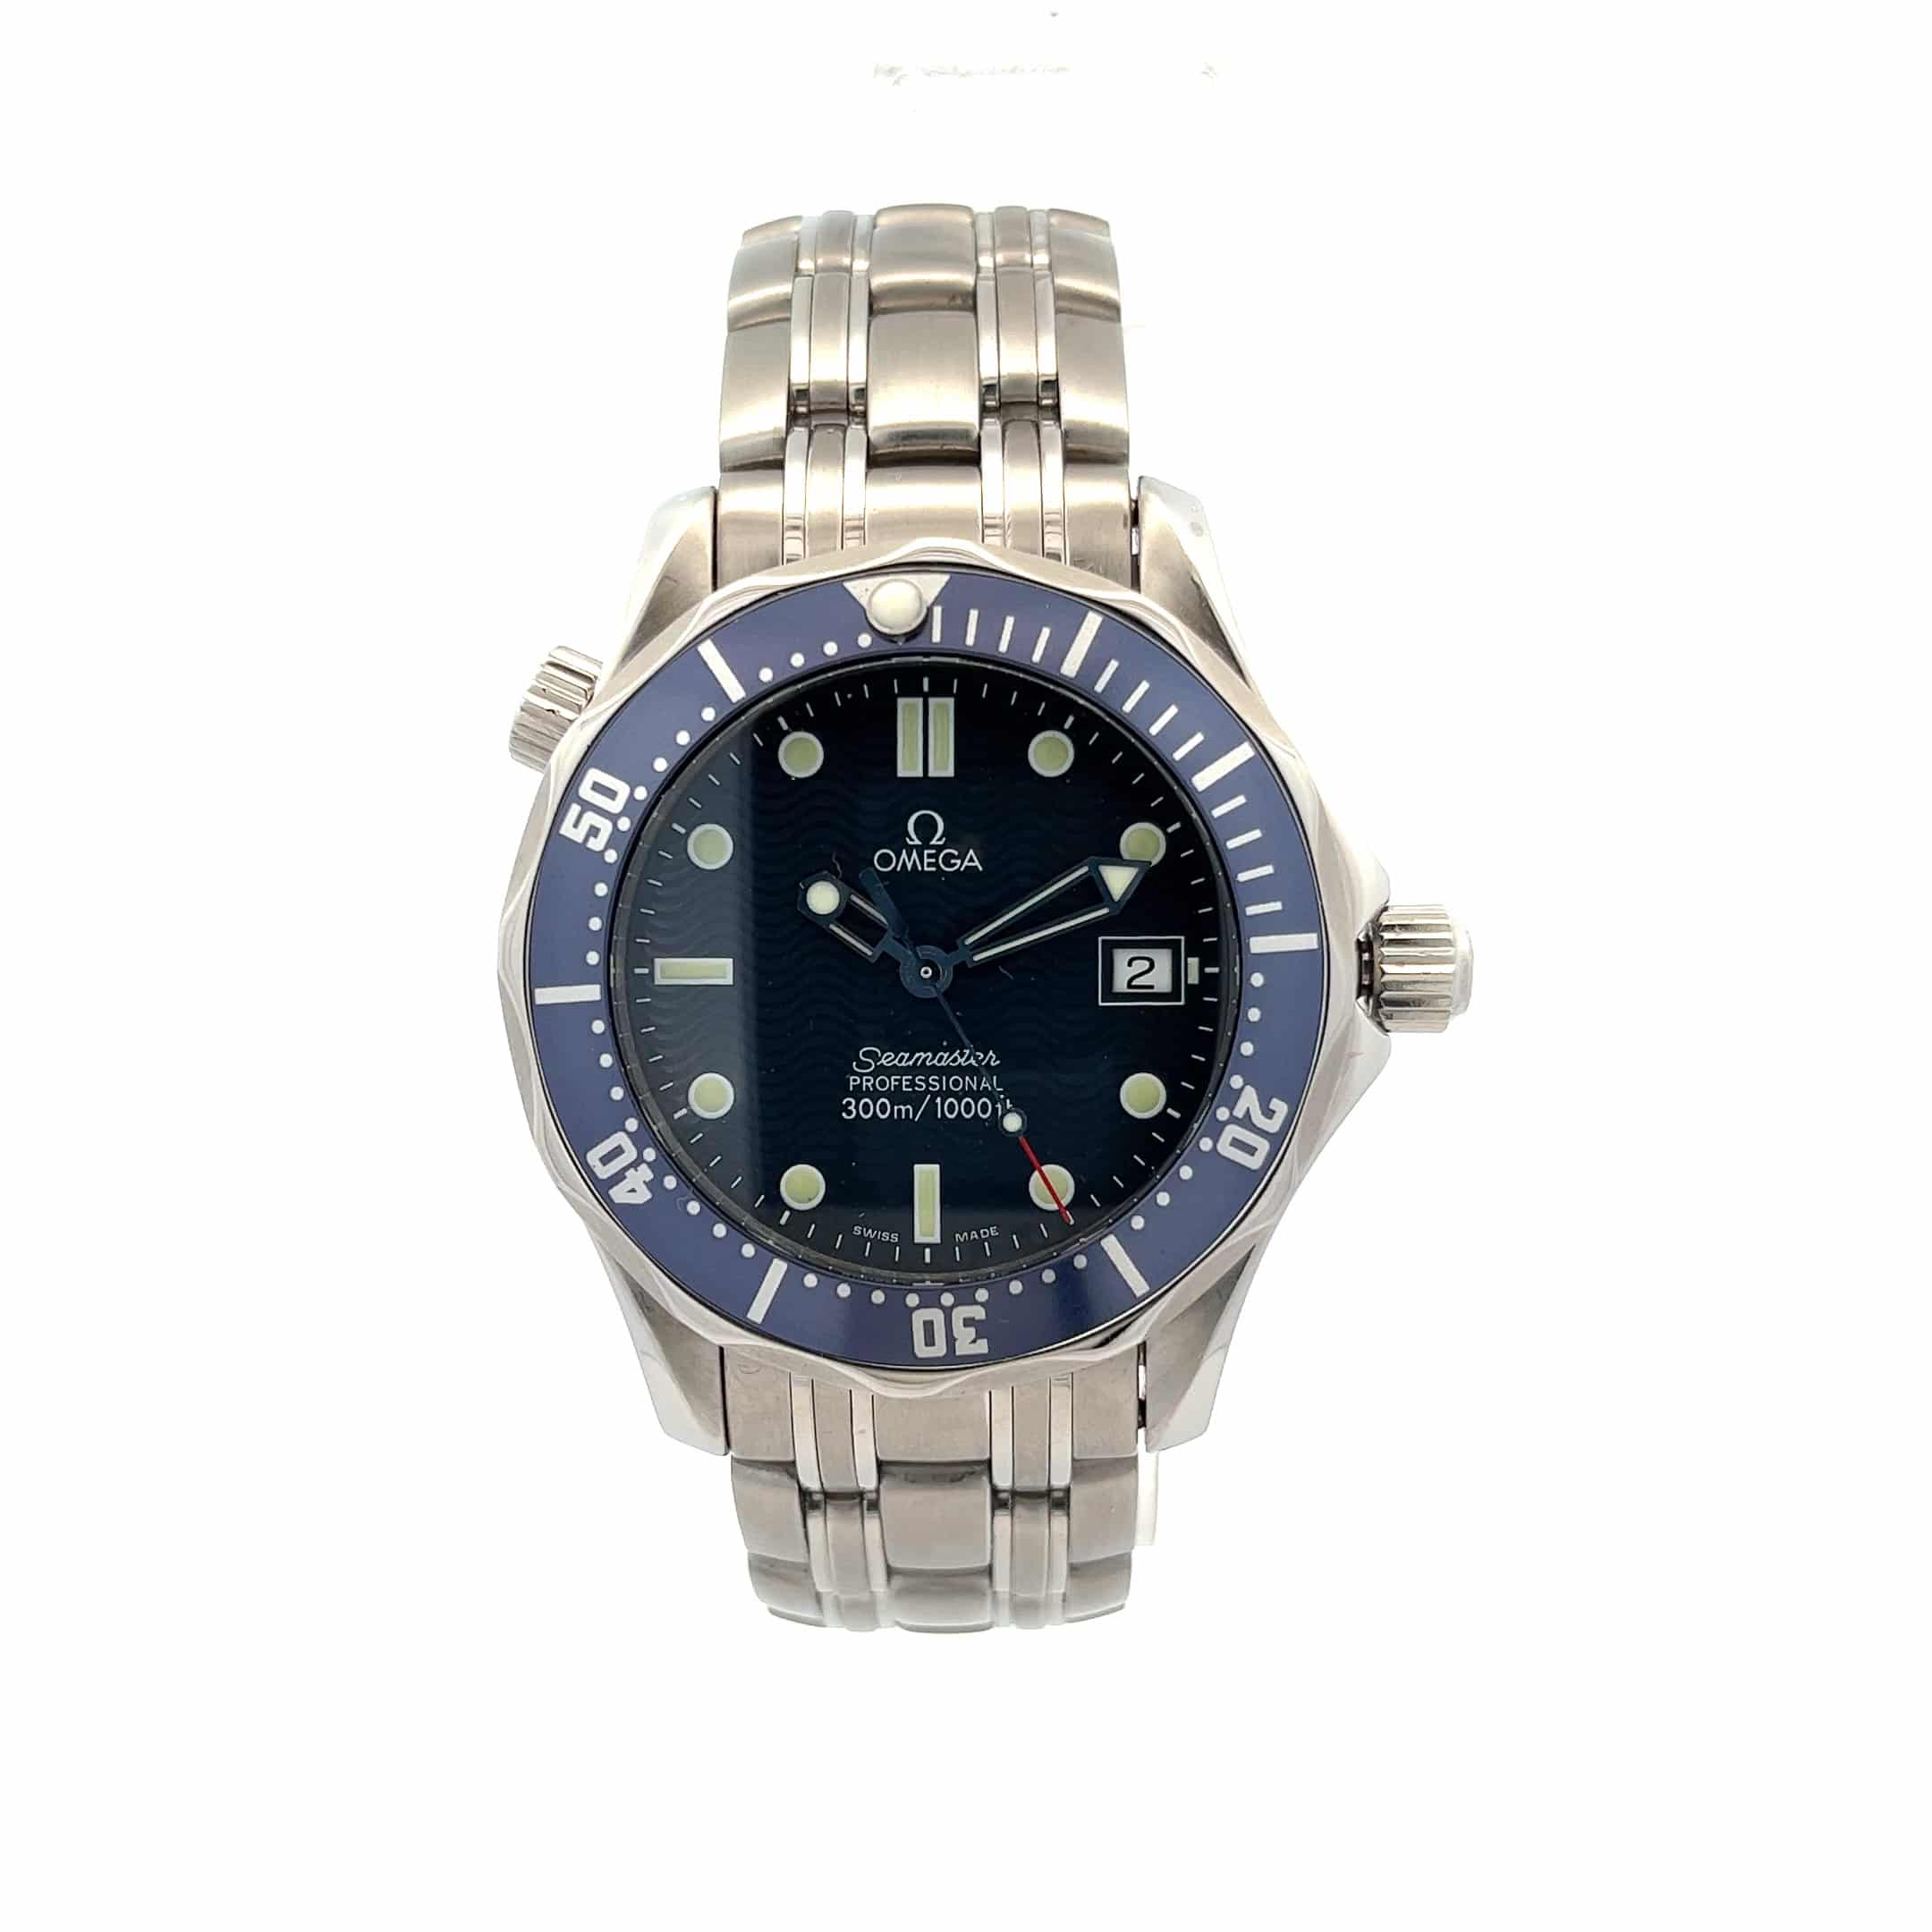 Midsize Stainless Steel Quartz Omega Seamaster With Blue Bezel and Dial